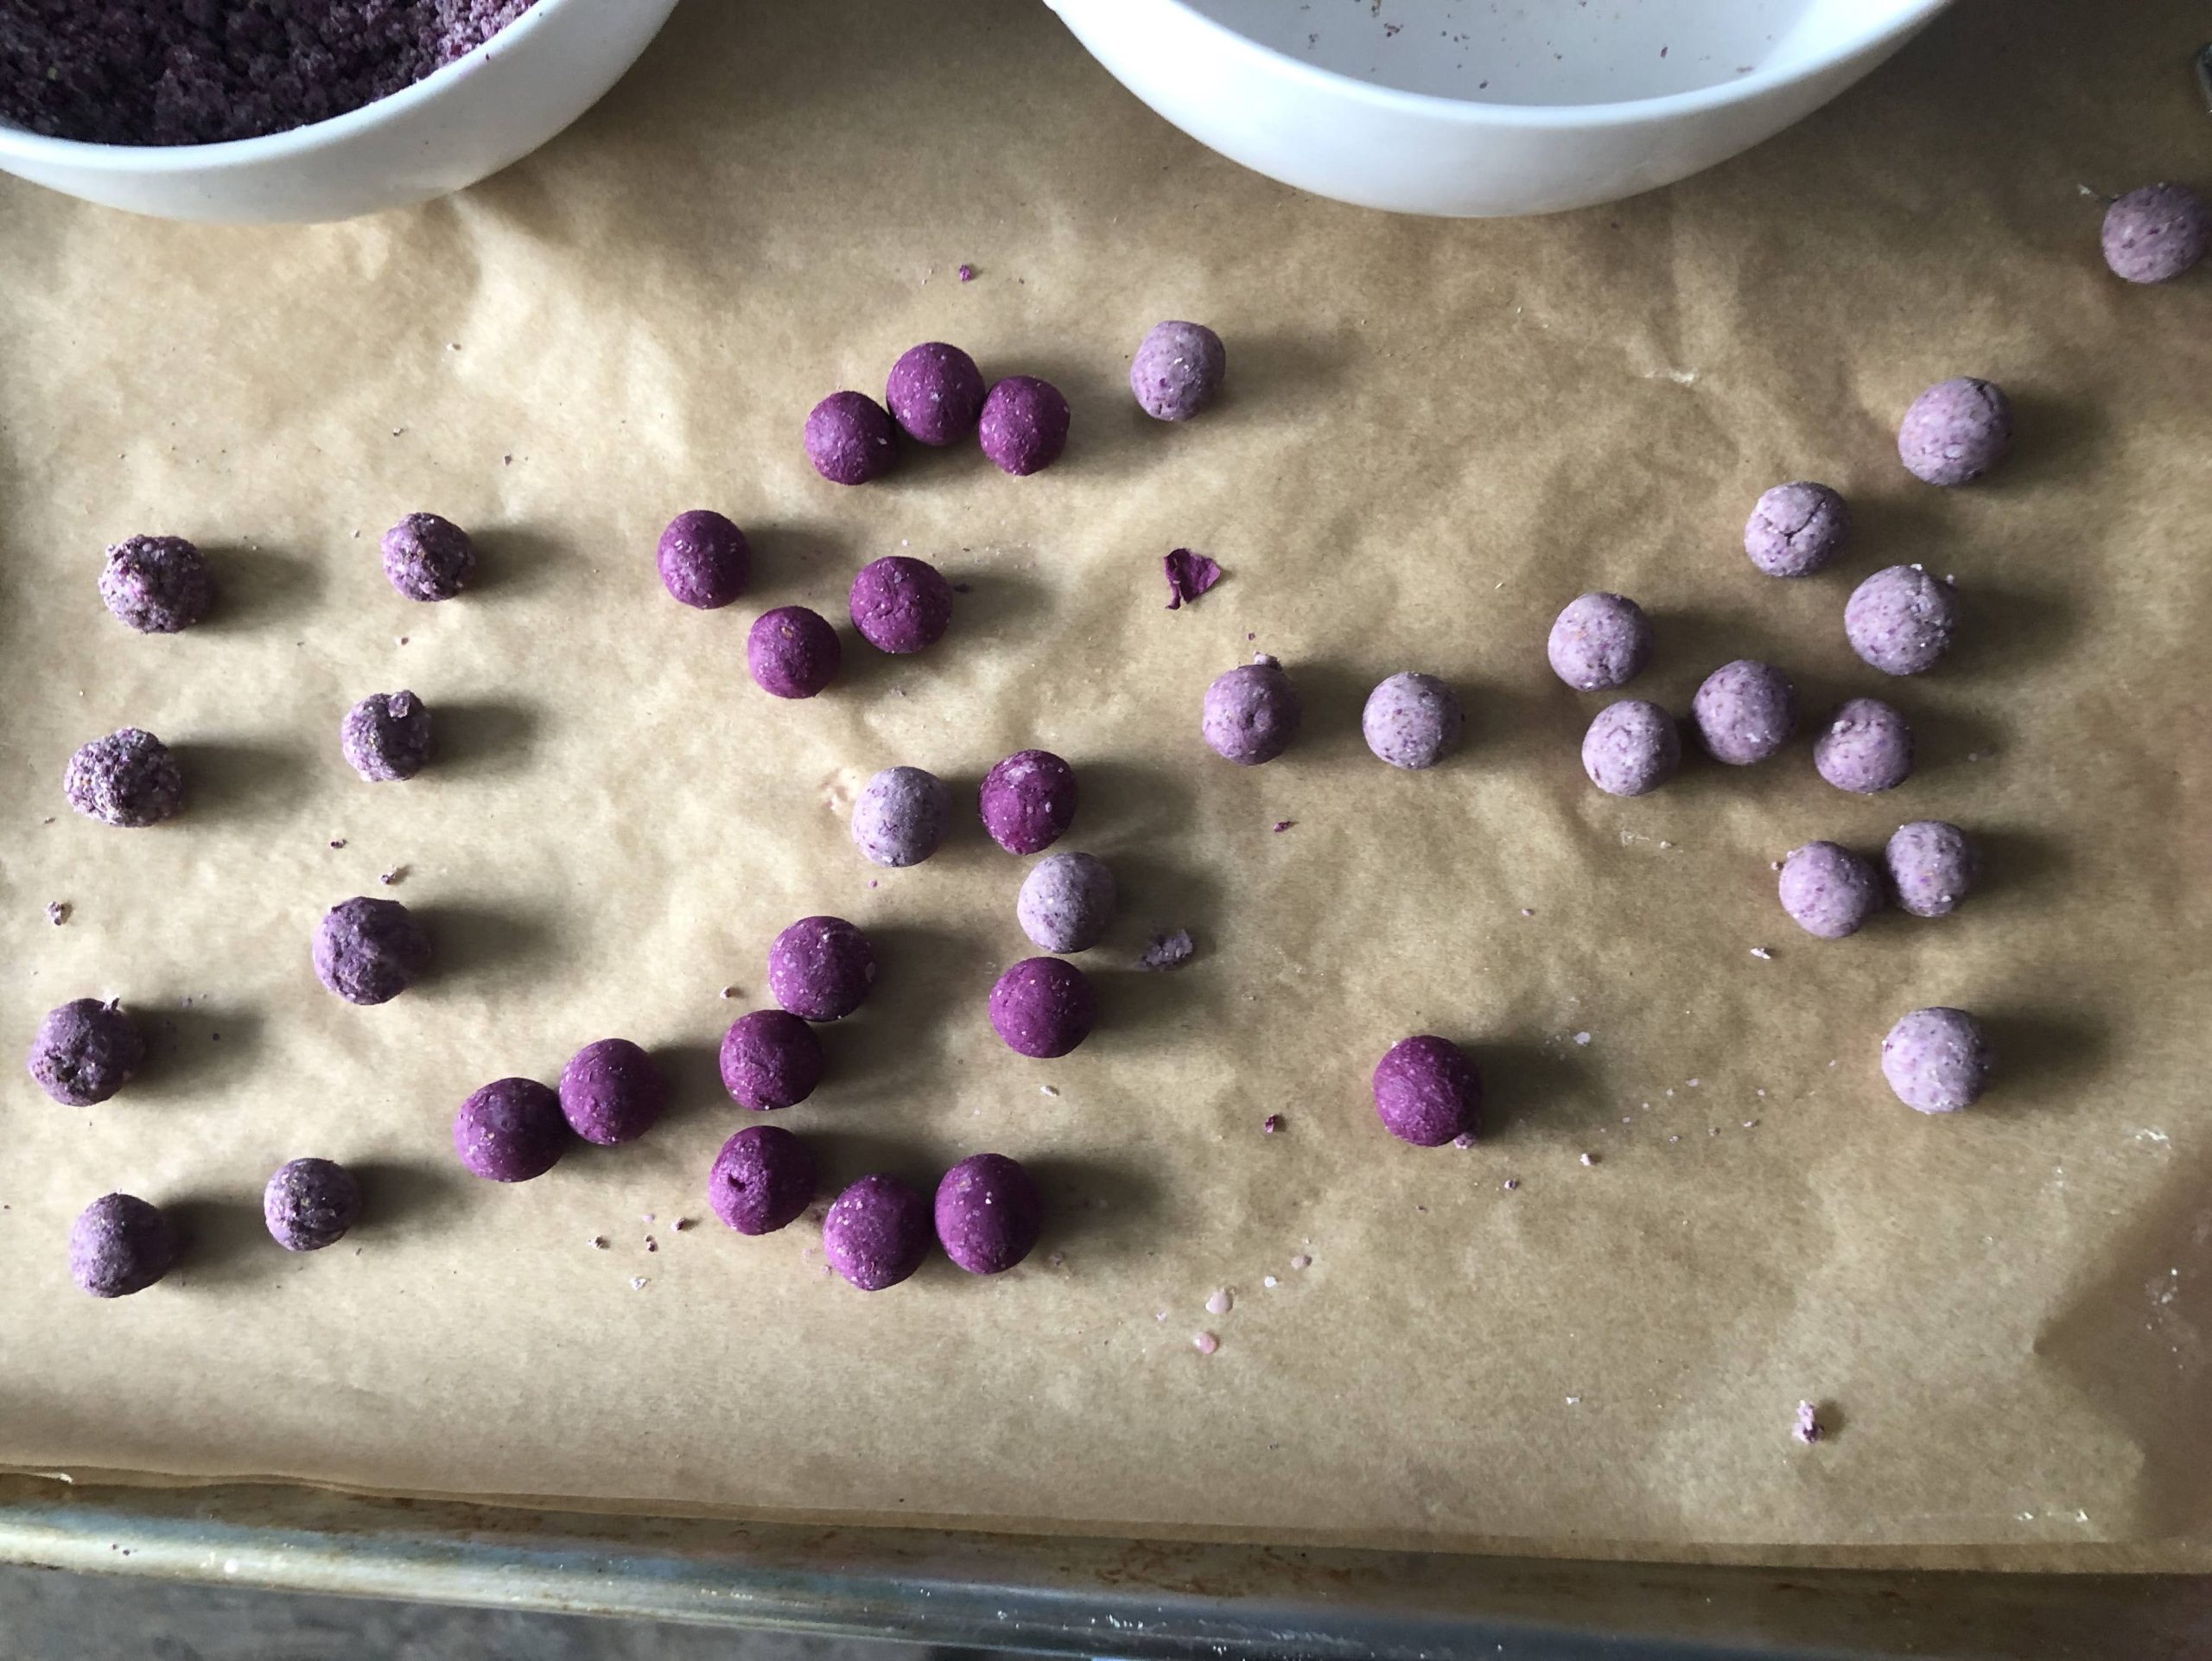 a collection of round balls of purple and purple gray tray on a baking sheet.